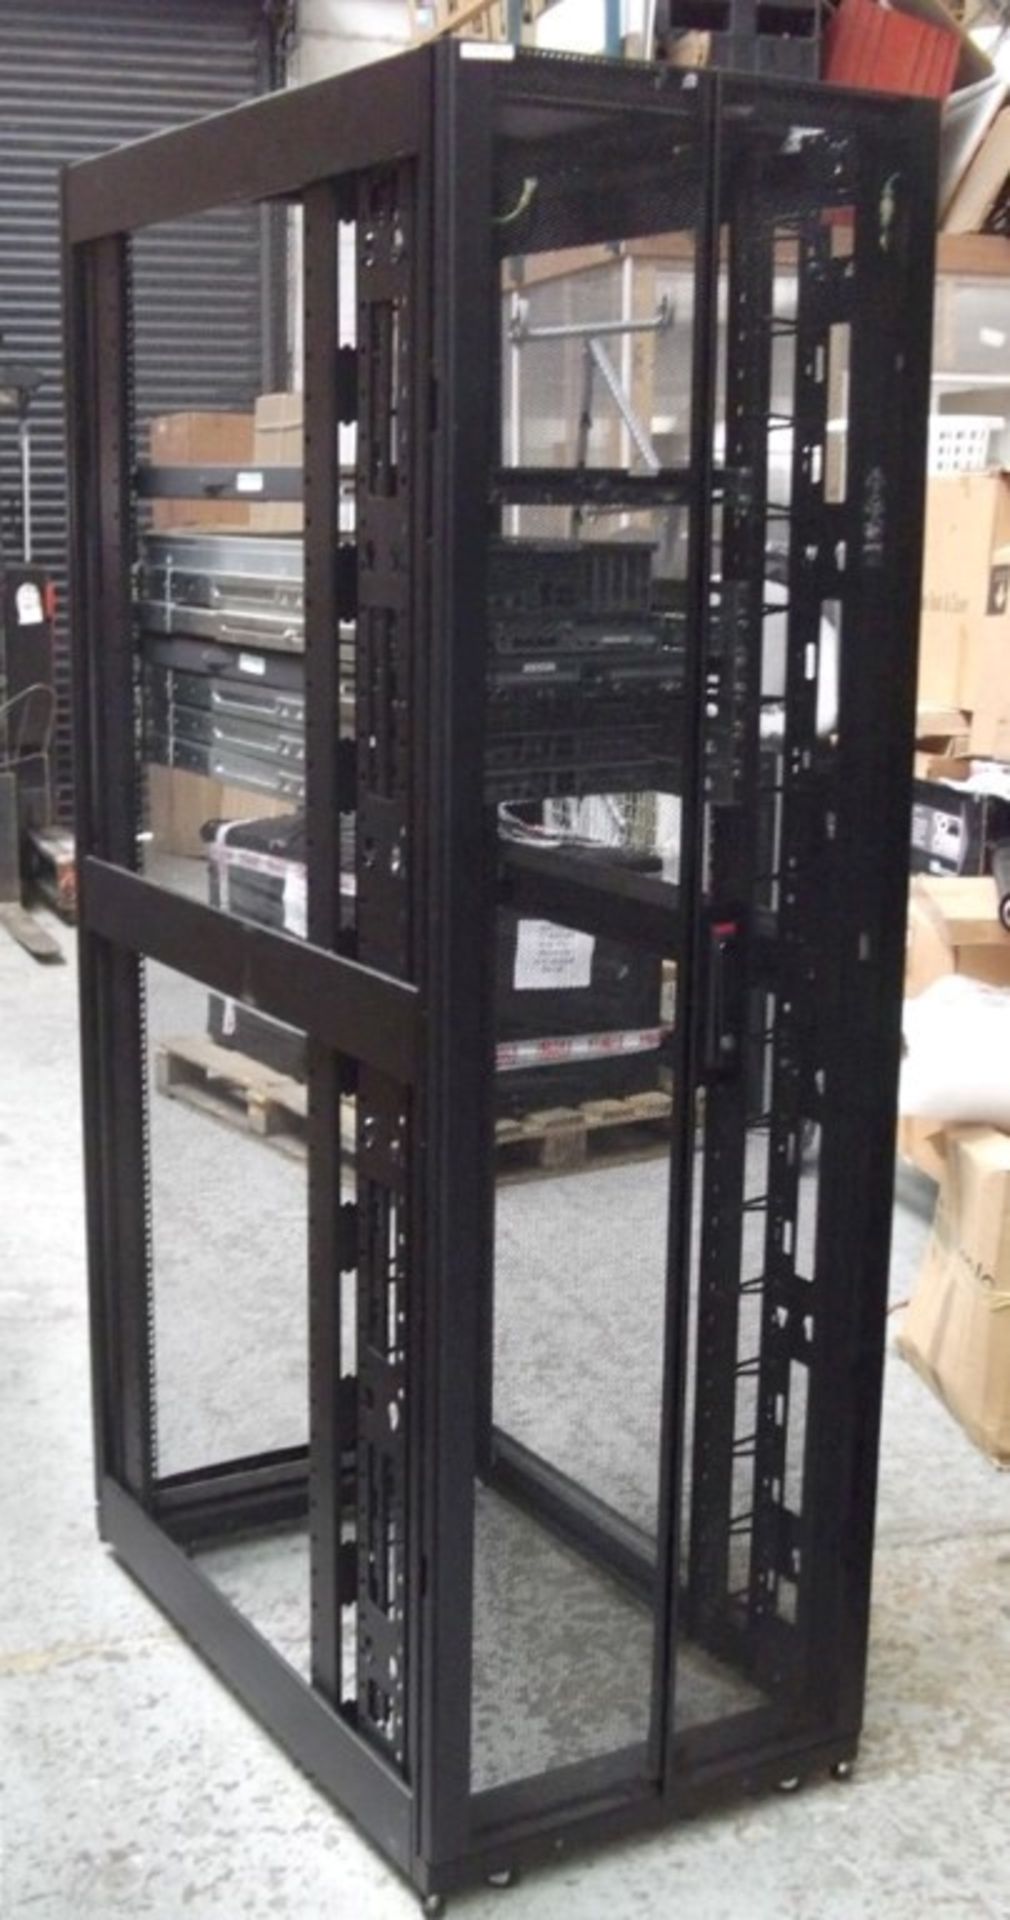 1 x APC Netshelter Server Rack With 7 x Assorted Sun Fire Servers (V & X-Series) - CL106 - Ref: - Image 2 of 8